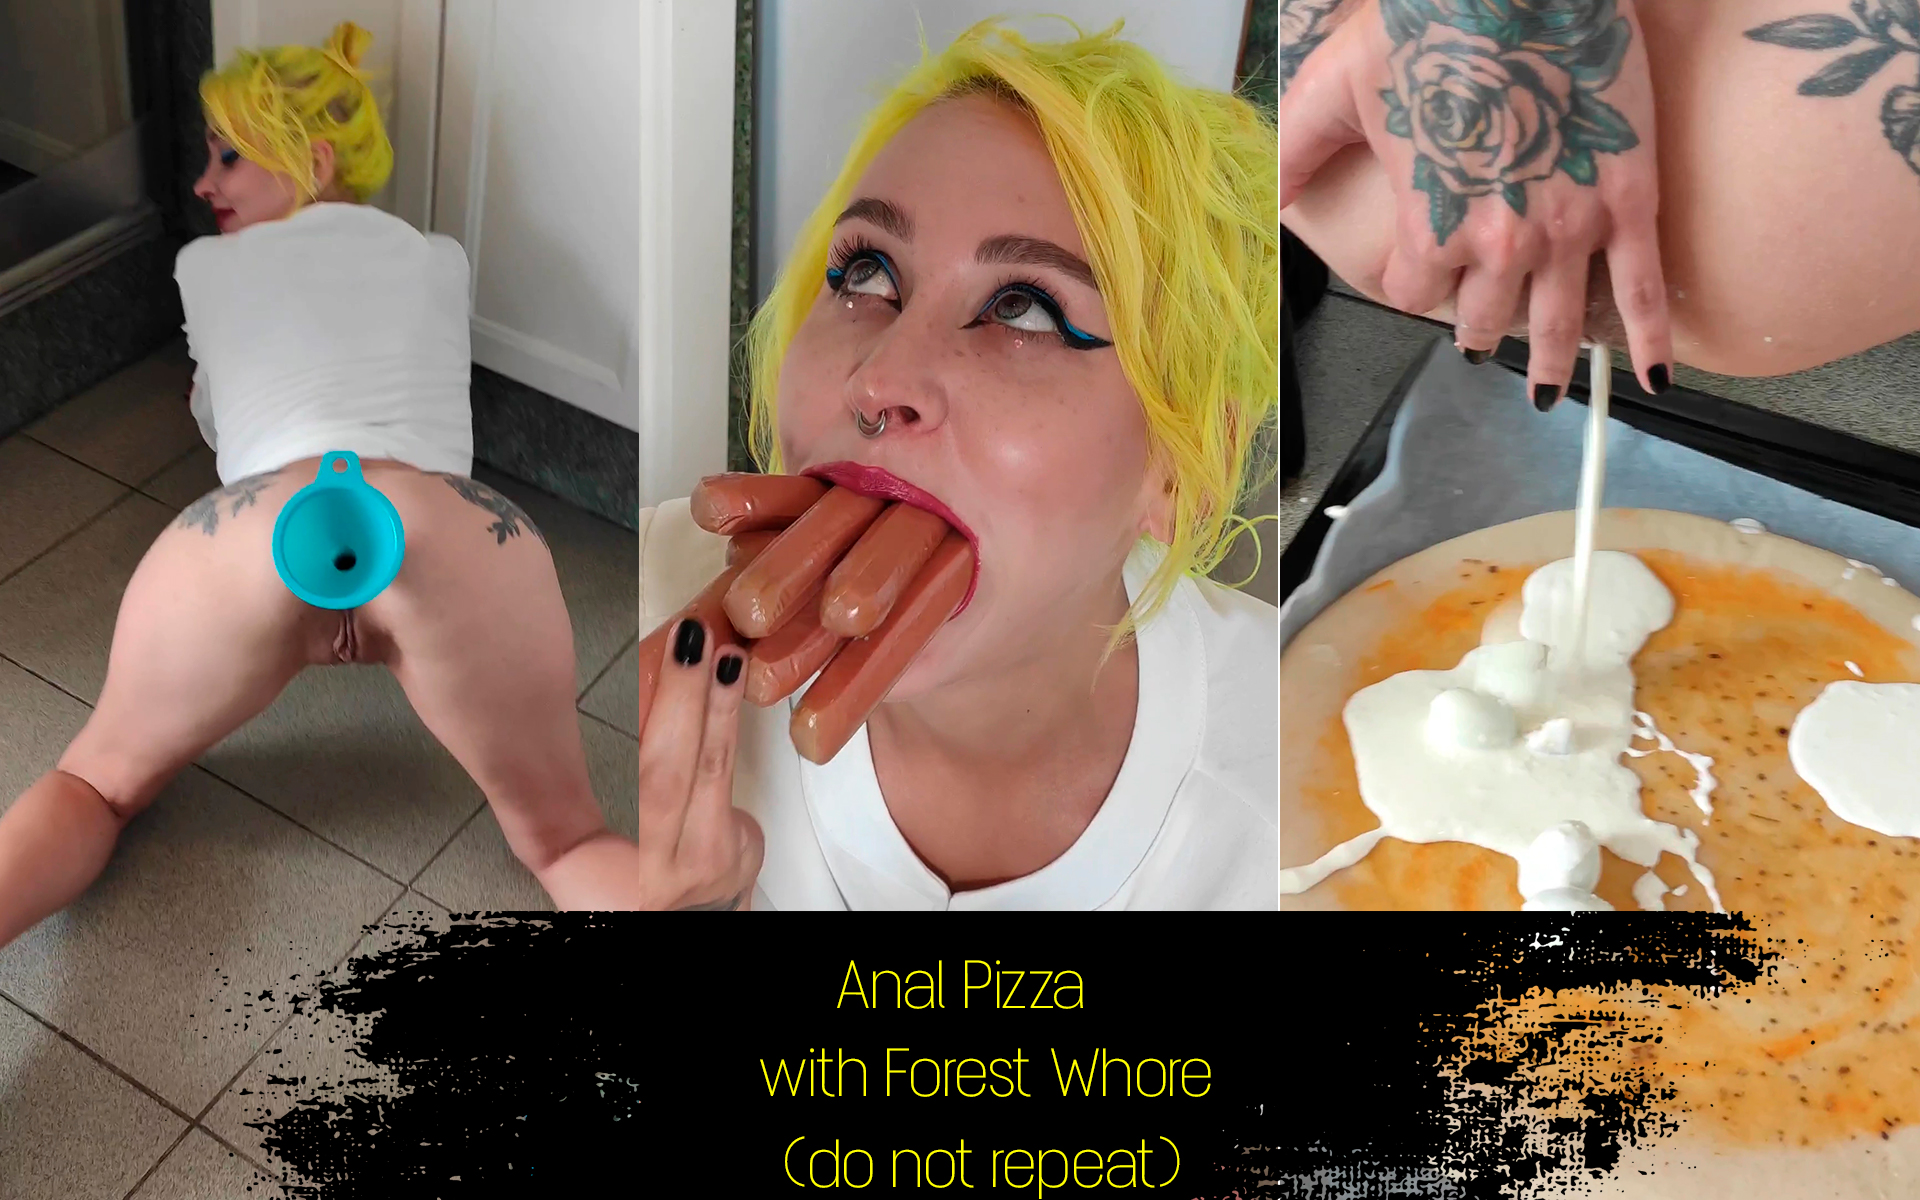 Anal Pizza with Forest Whore